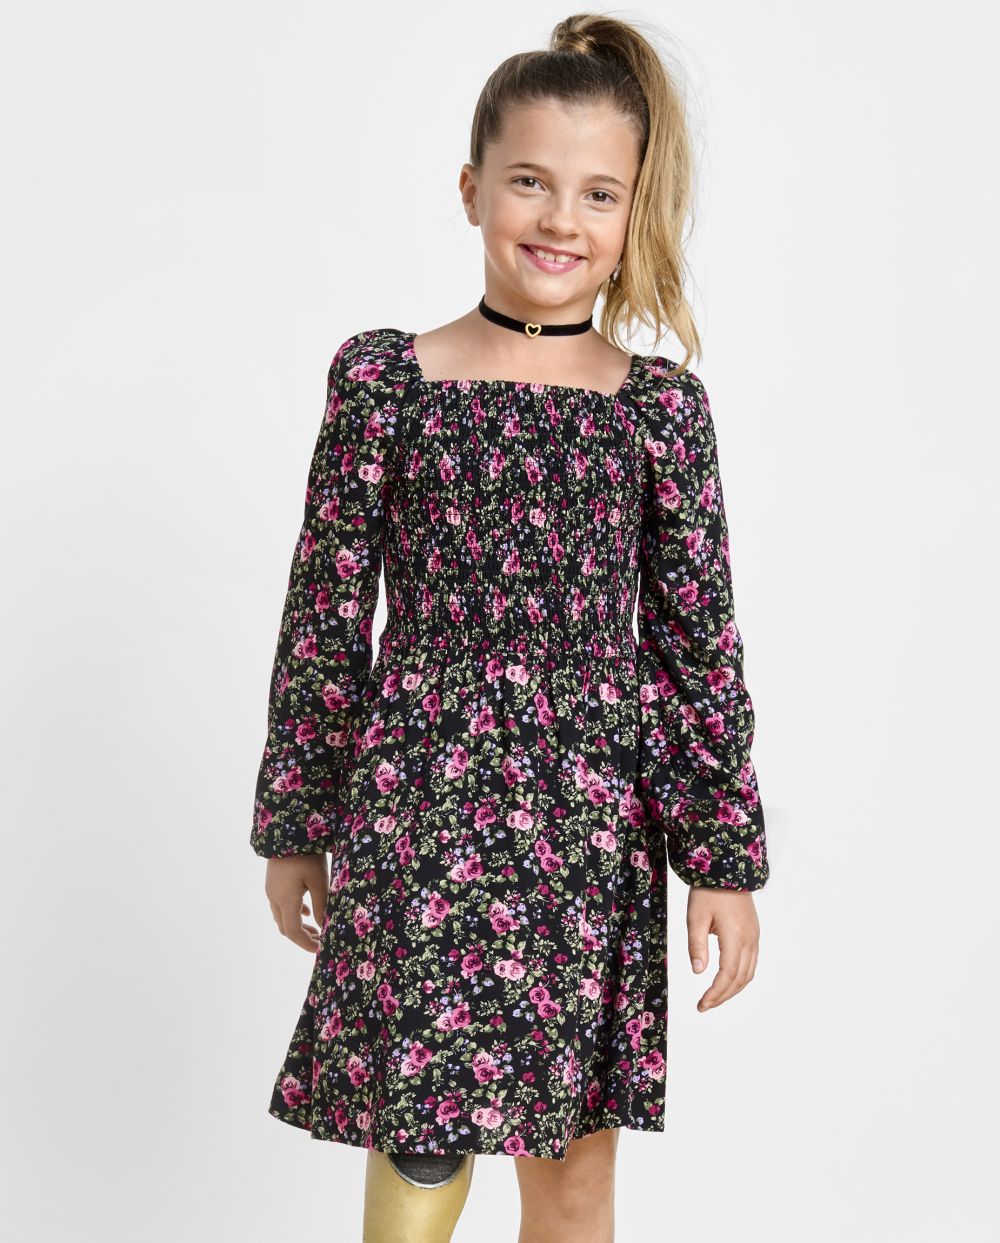 Girls Floral Print Long Sleeves Rayon Above the Knee Smocked Square Neck Dress